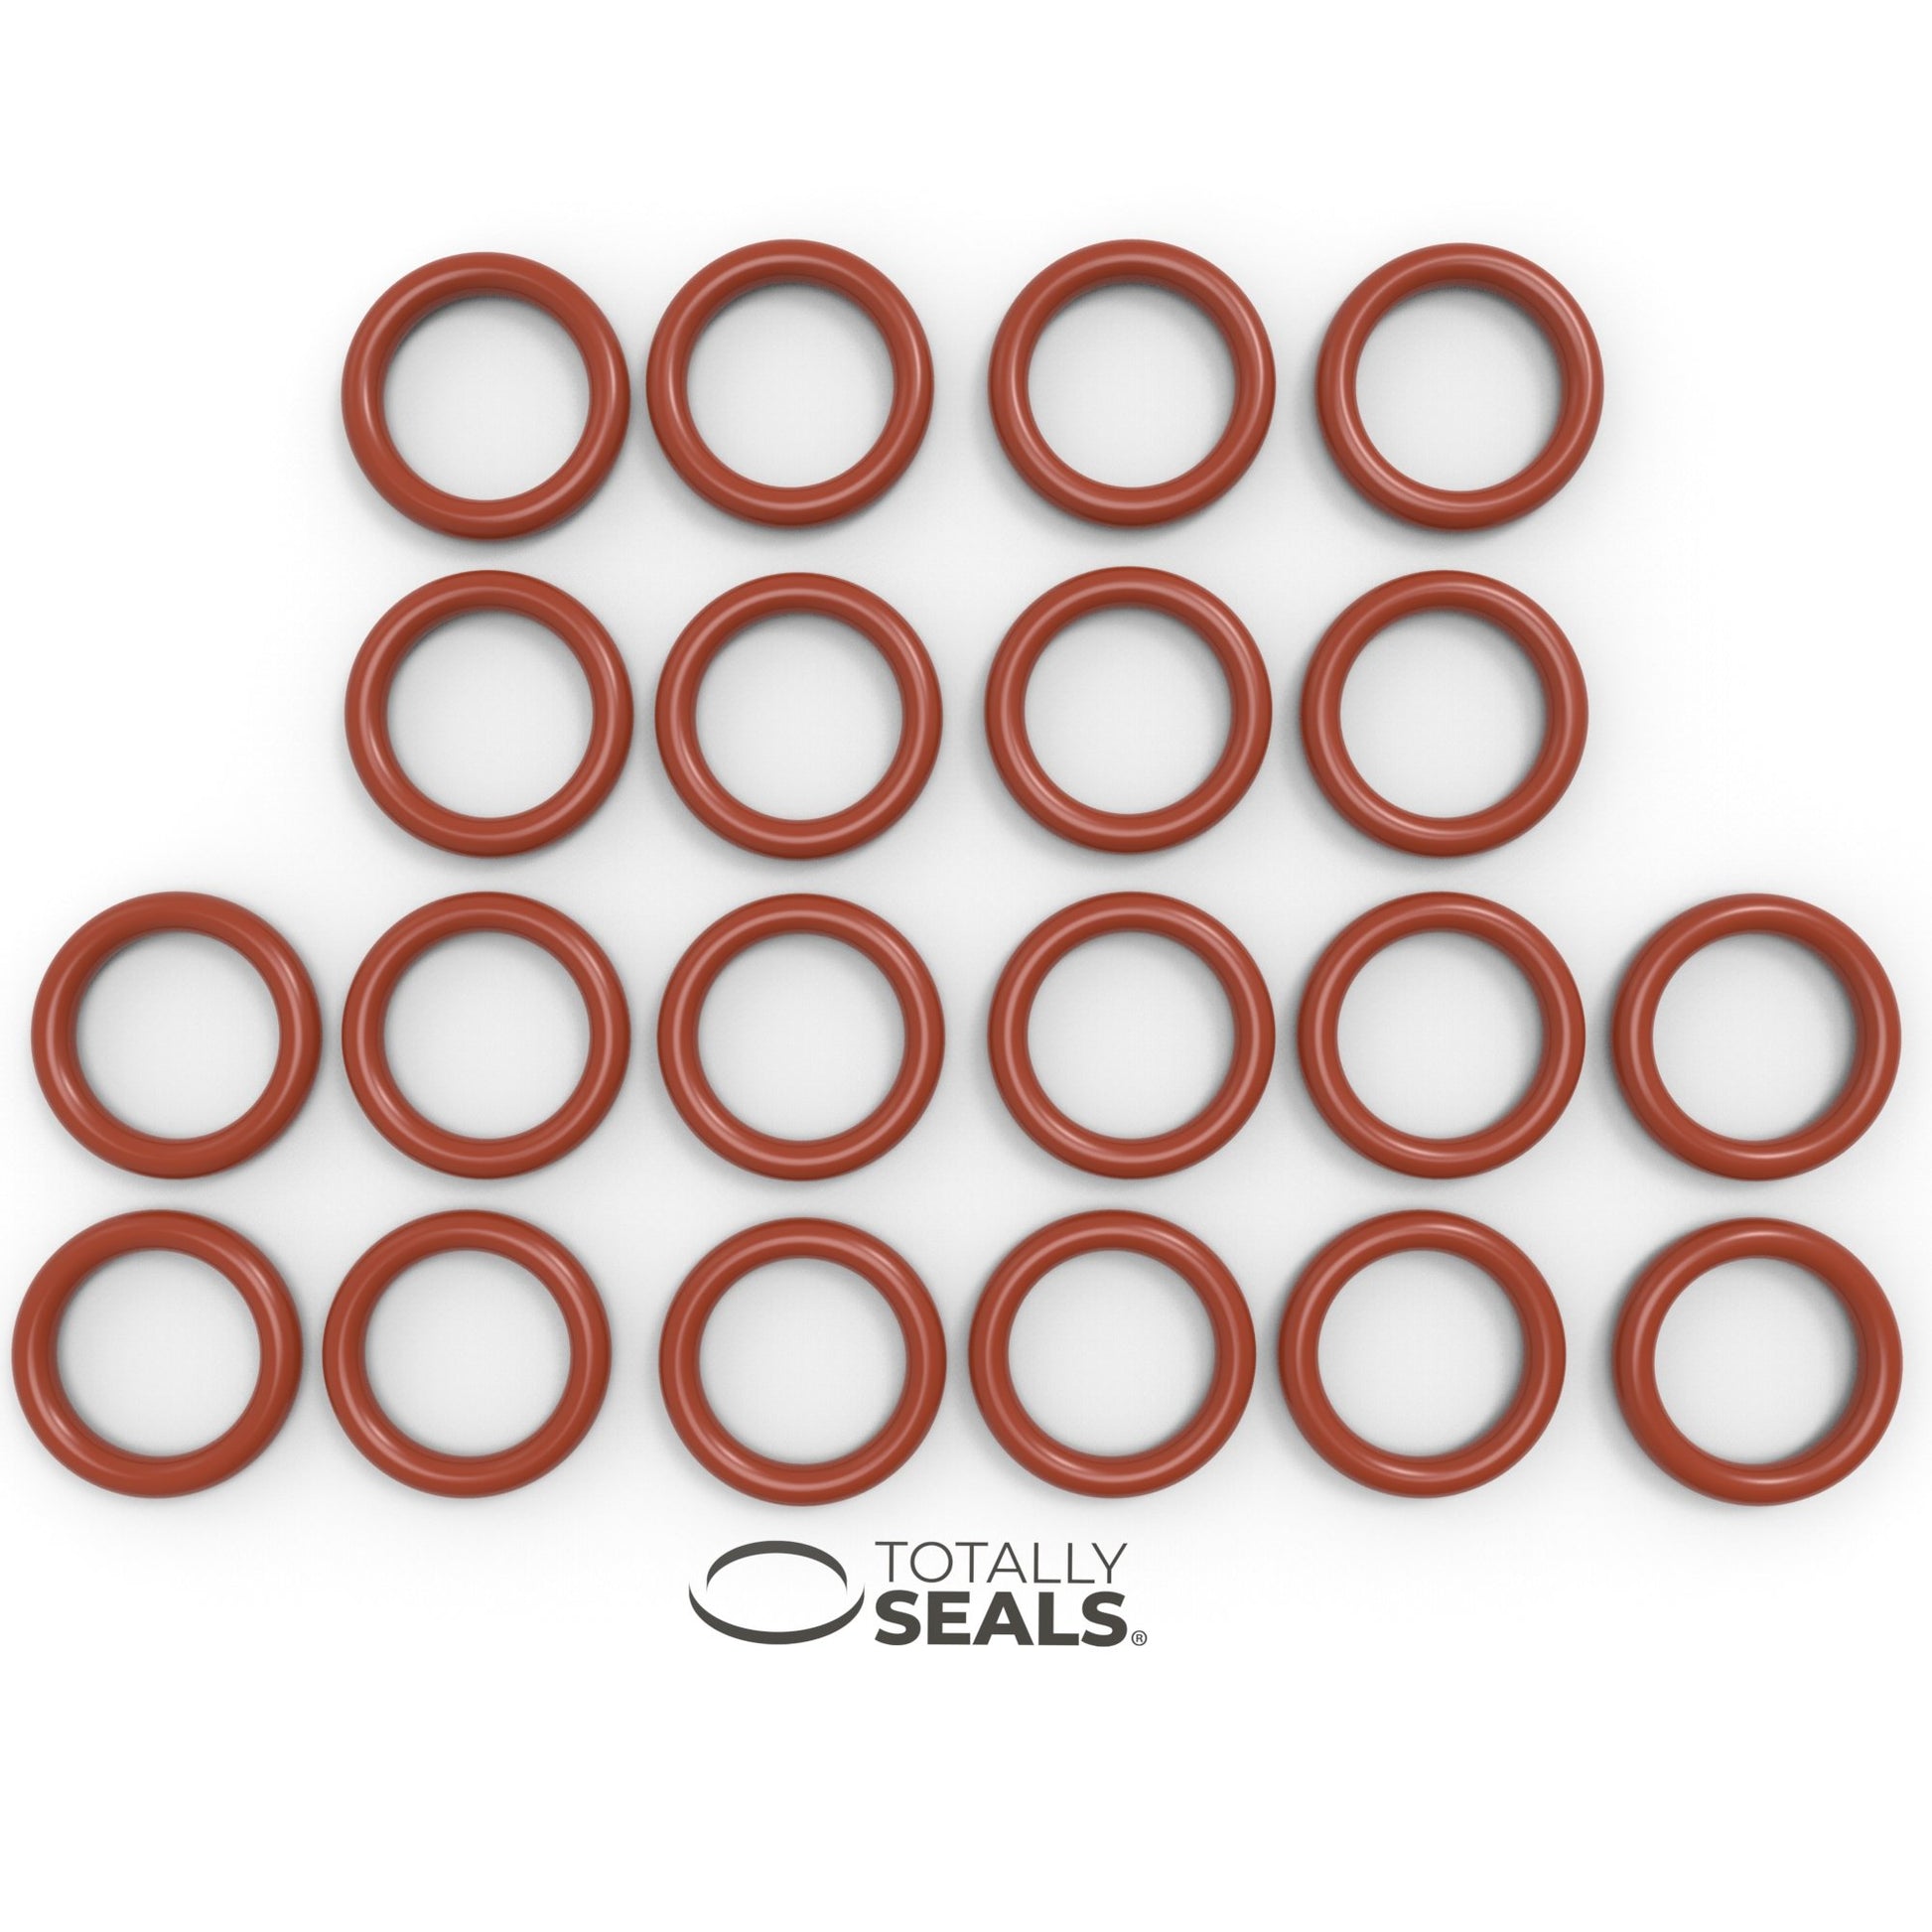 30mm x 3mm (36mm OD) Silicone O-Rings - Totally Seals®